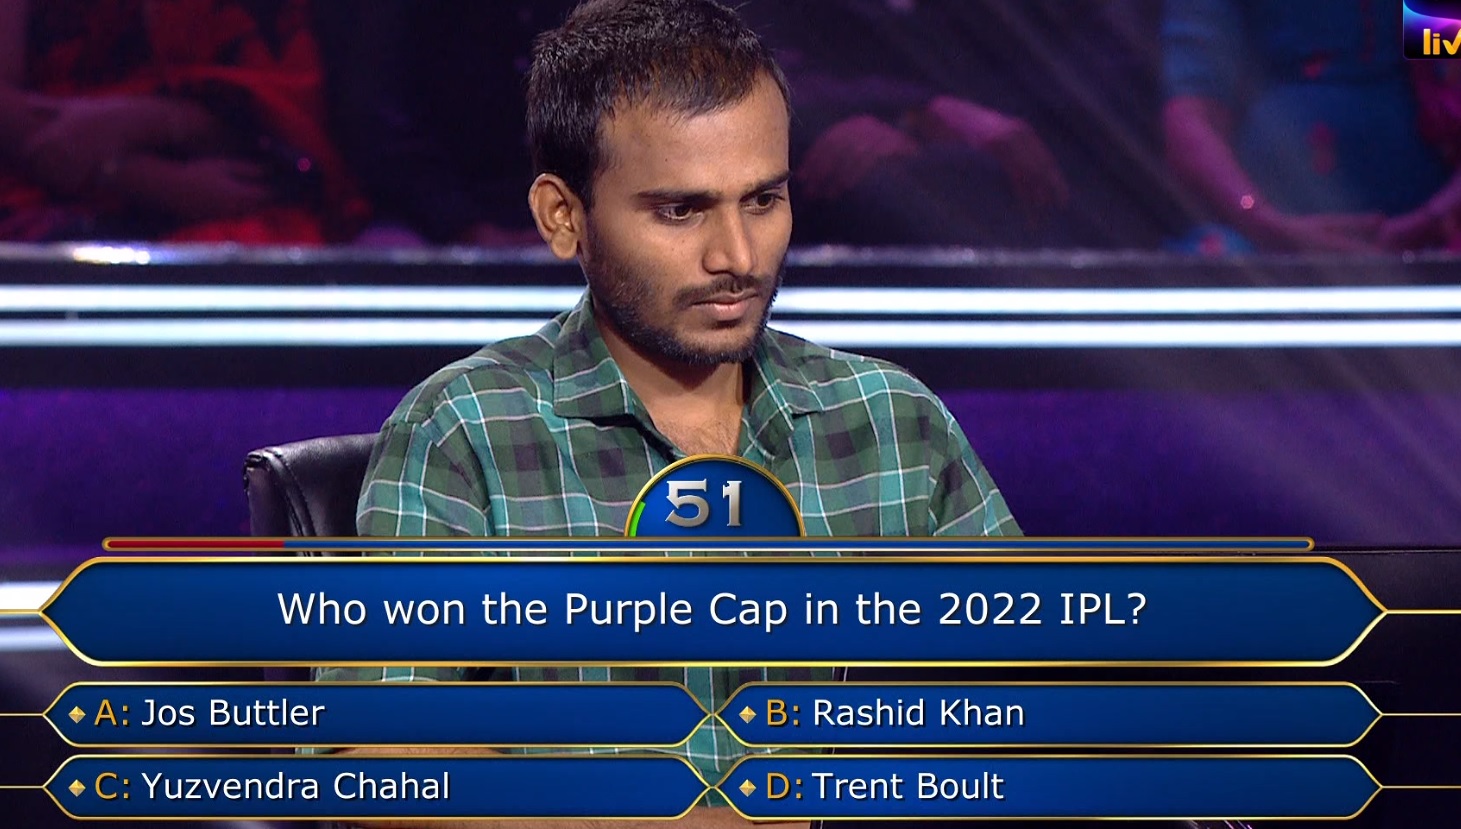 Ques : Who won the Purple Cap in the 2022 IPL?